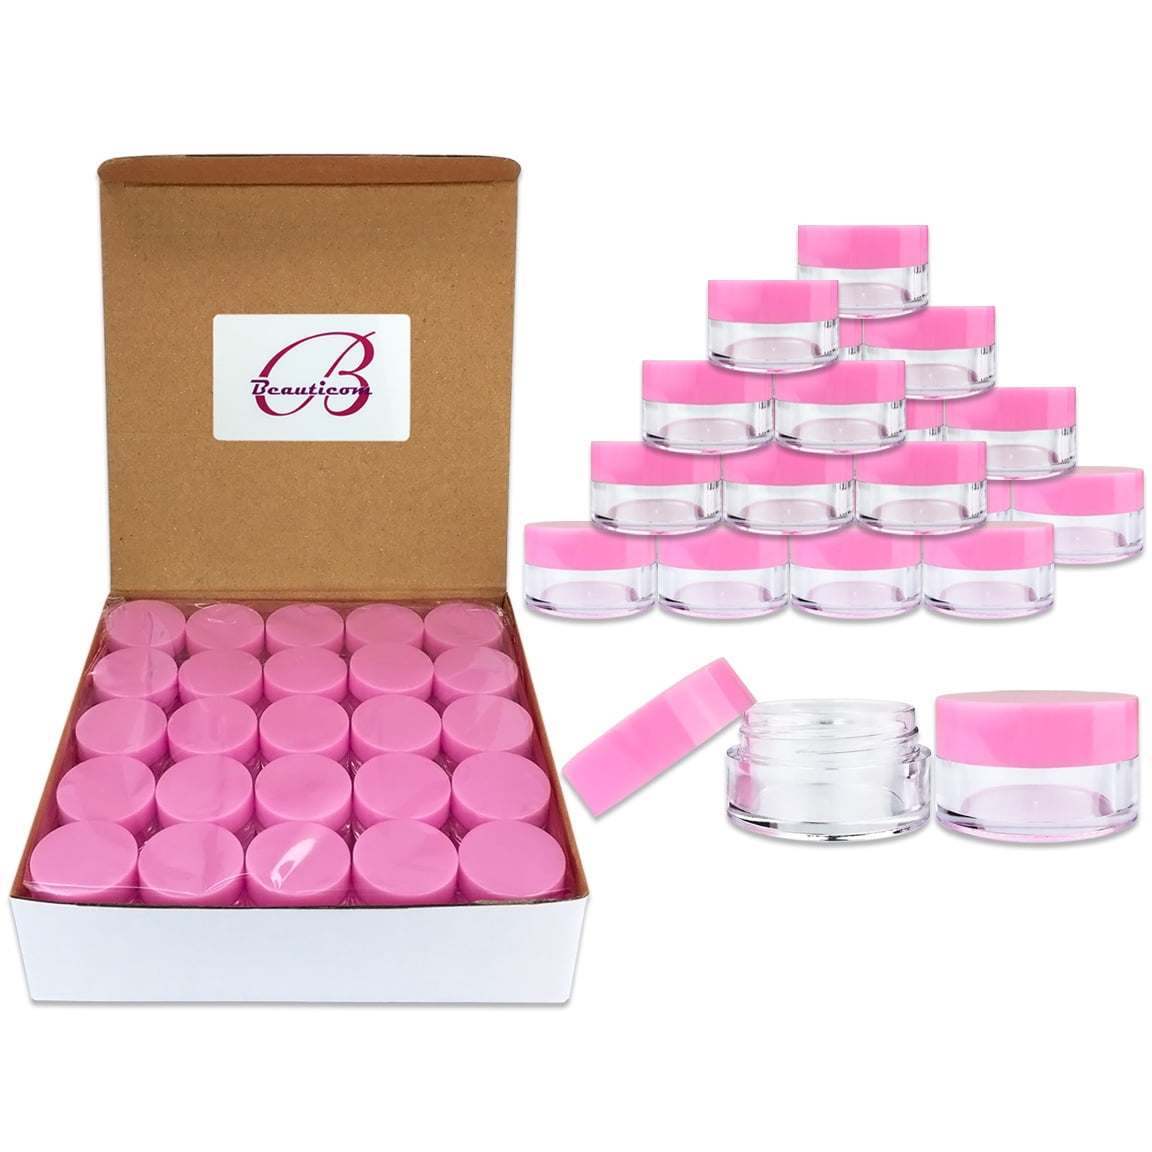 20pcs 2ml Silicone Containers With Various Colors For Storing Creams,  Balms, And Other Cosmetics, Perfect For Sample Packaging And Organizing